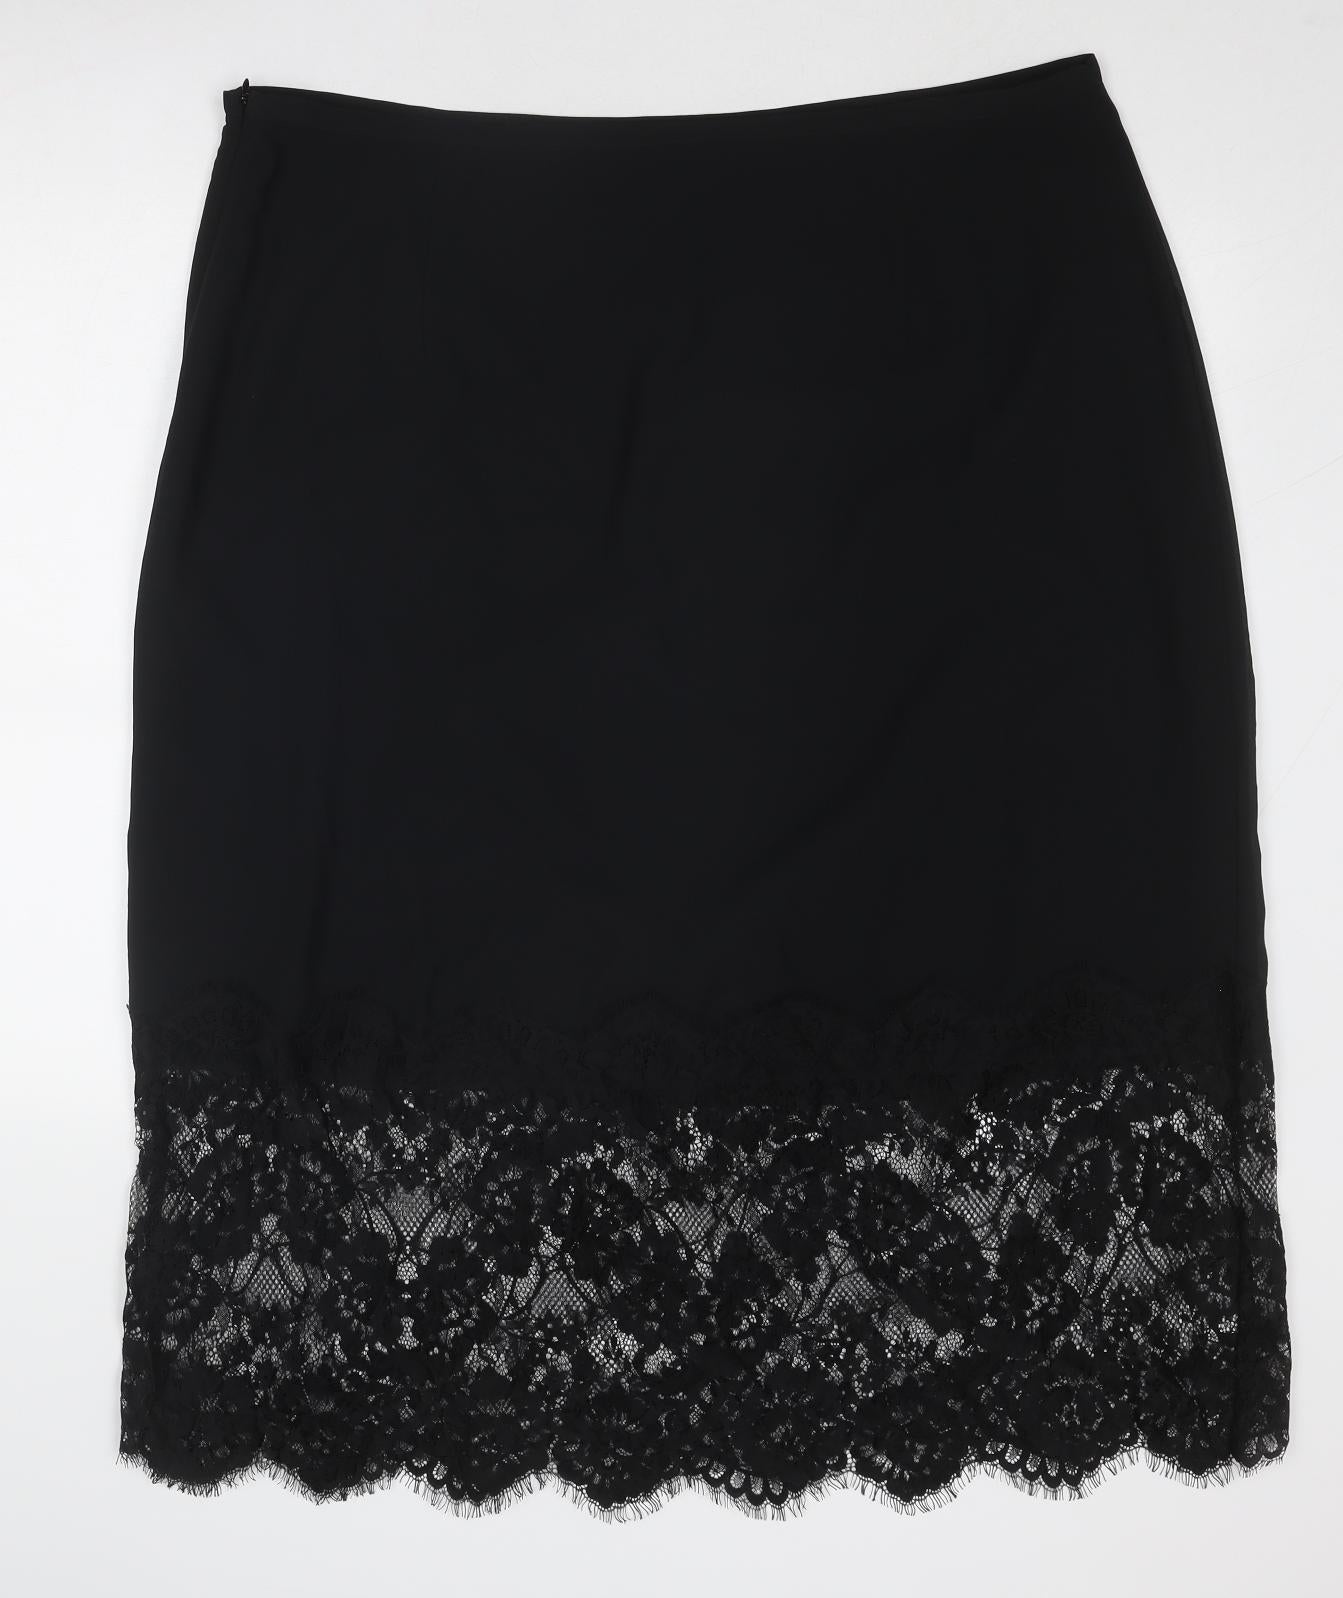 Marks and Spencer Womens Black Floral Polyester A-Line Skirt Size 22 Zip